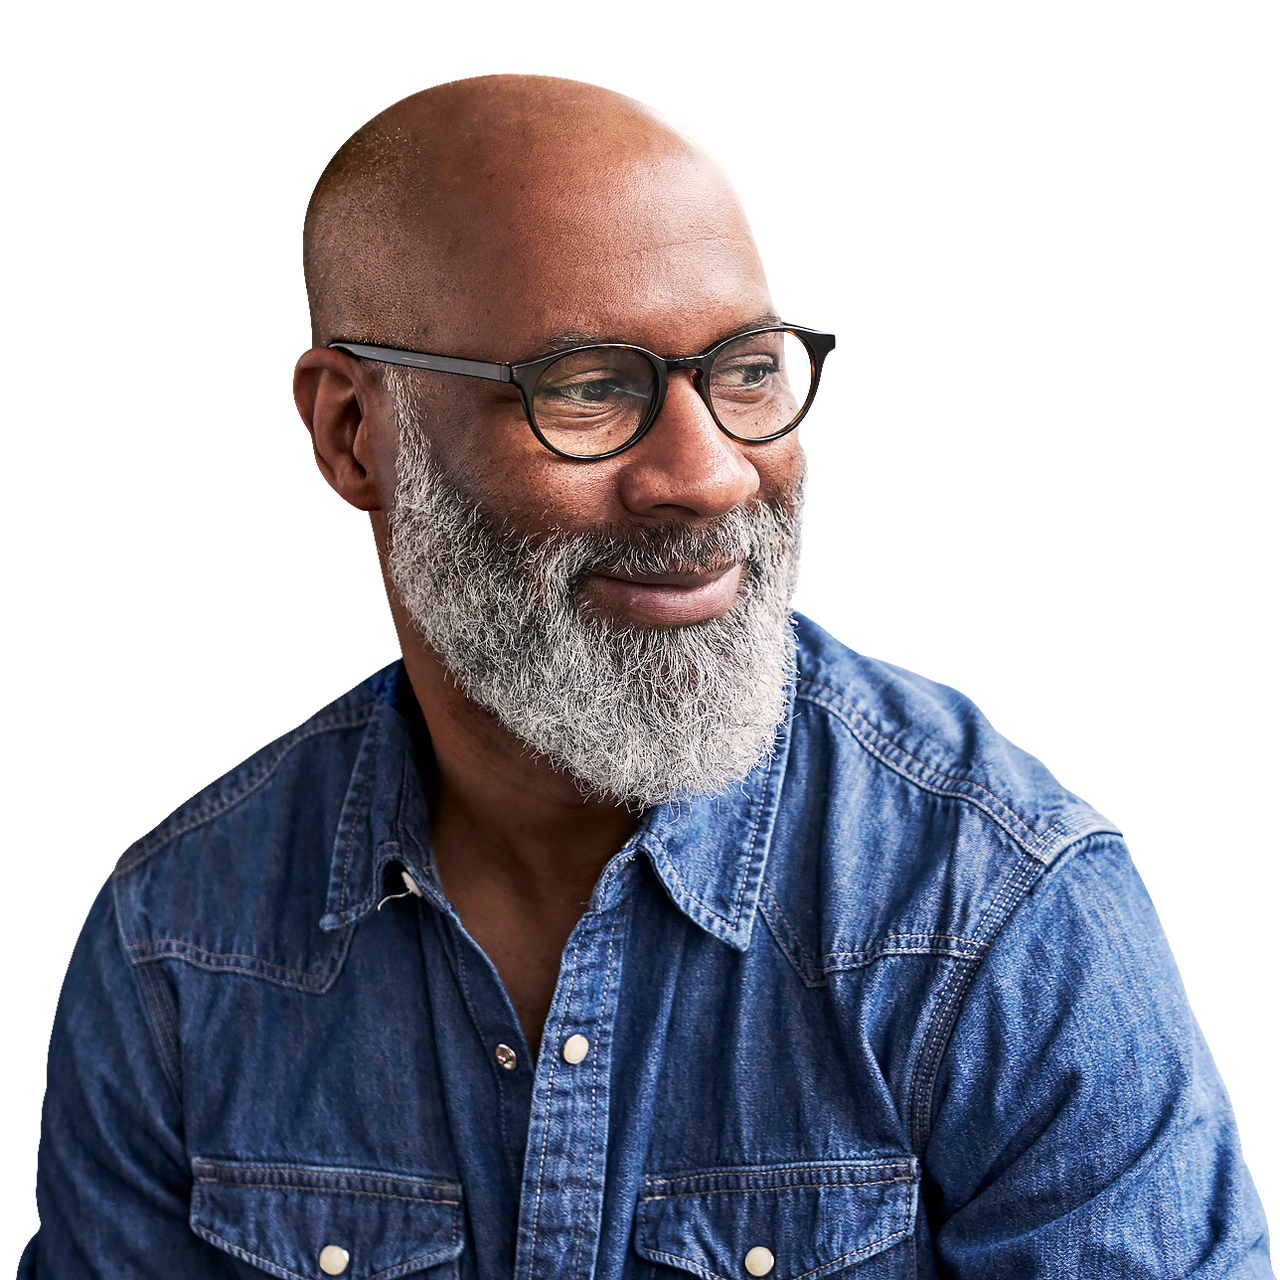 Bald man with glasses and beard smiling